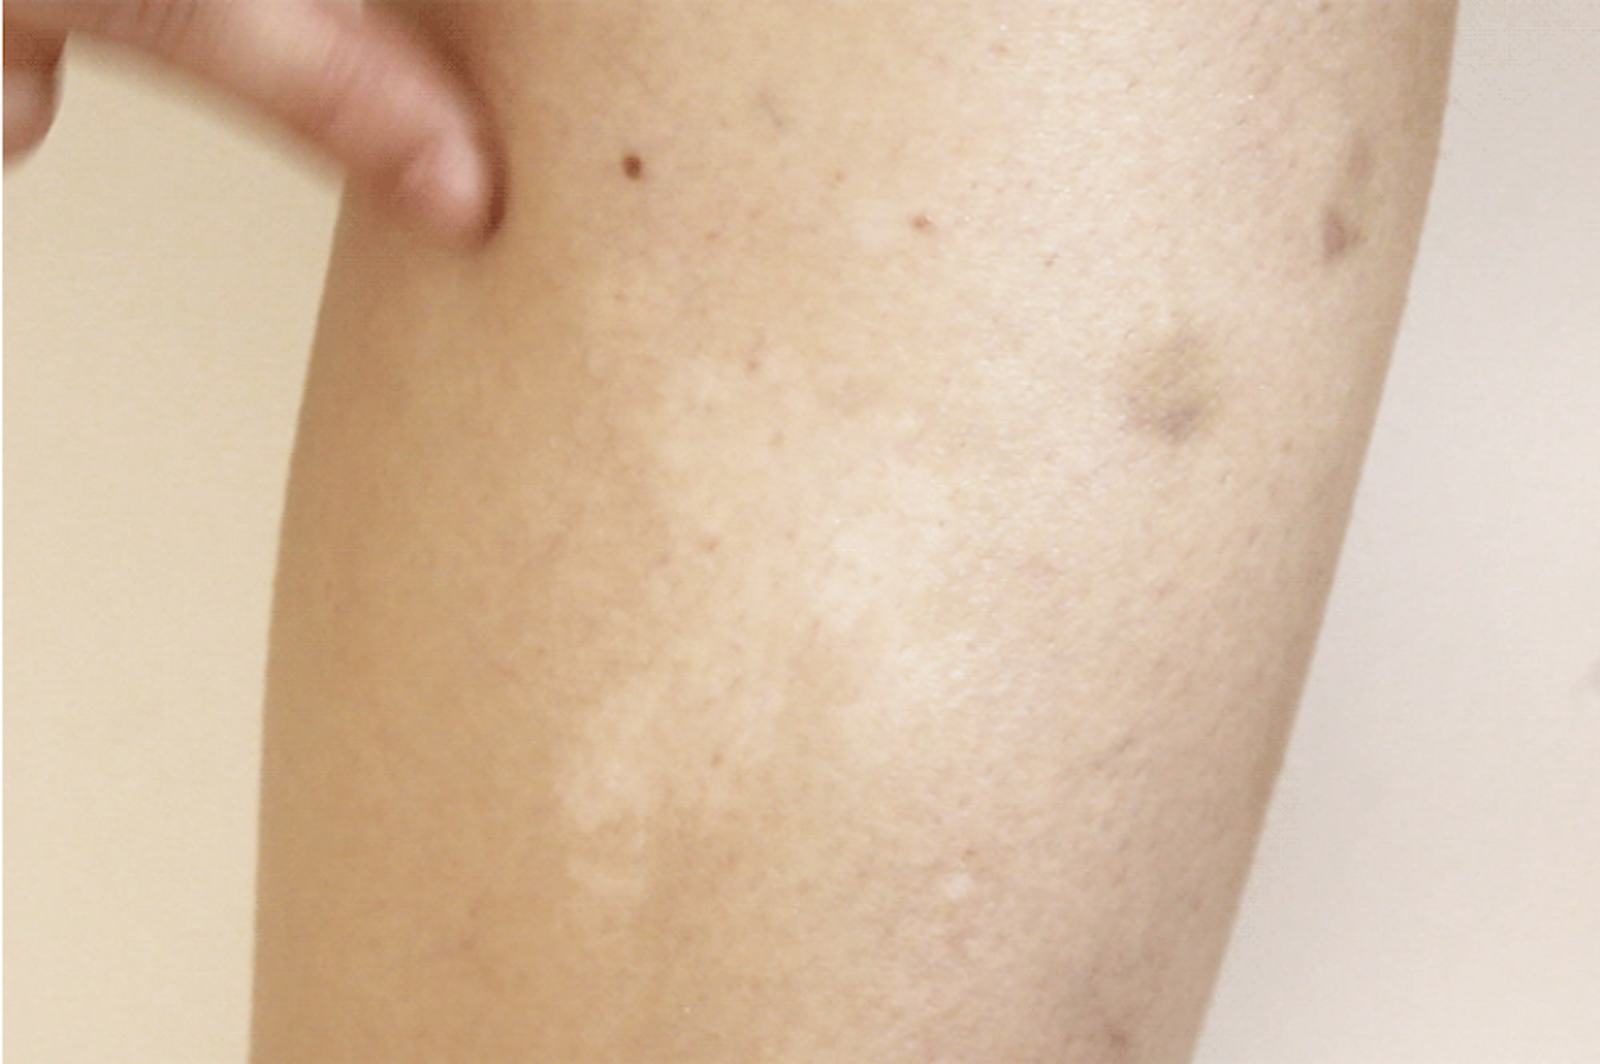 How To Cover Vitiligo Patches On Your Arms And Legs For A Special Summer